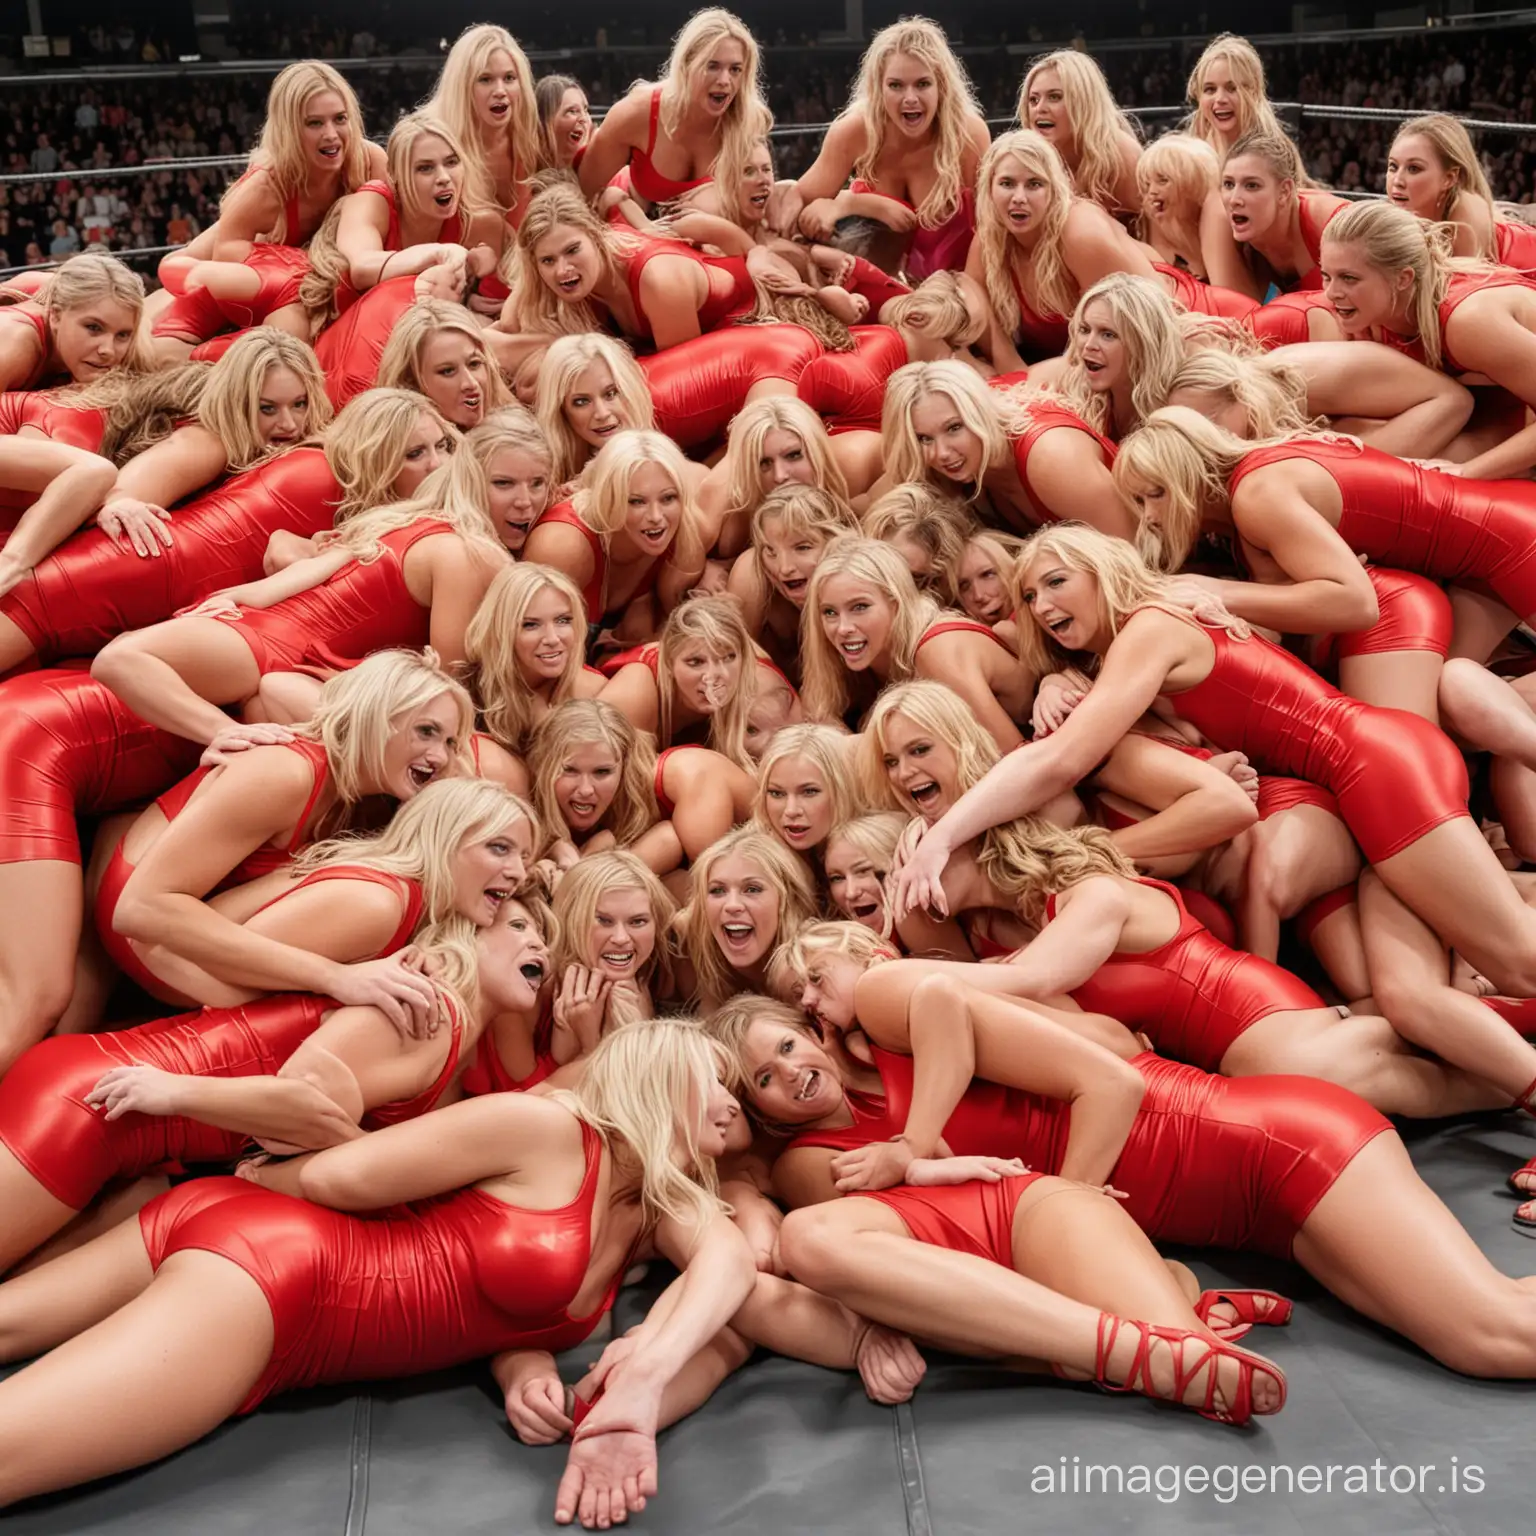 huge pile of blonde women wrestling in a pile wearing red bodycon dresses in a wrestling ring